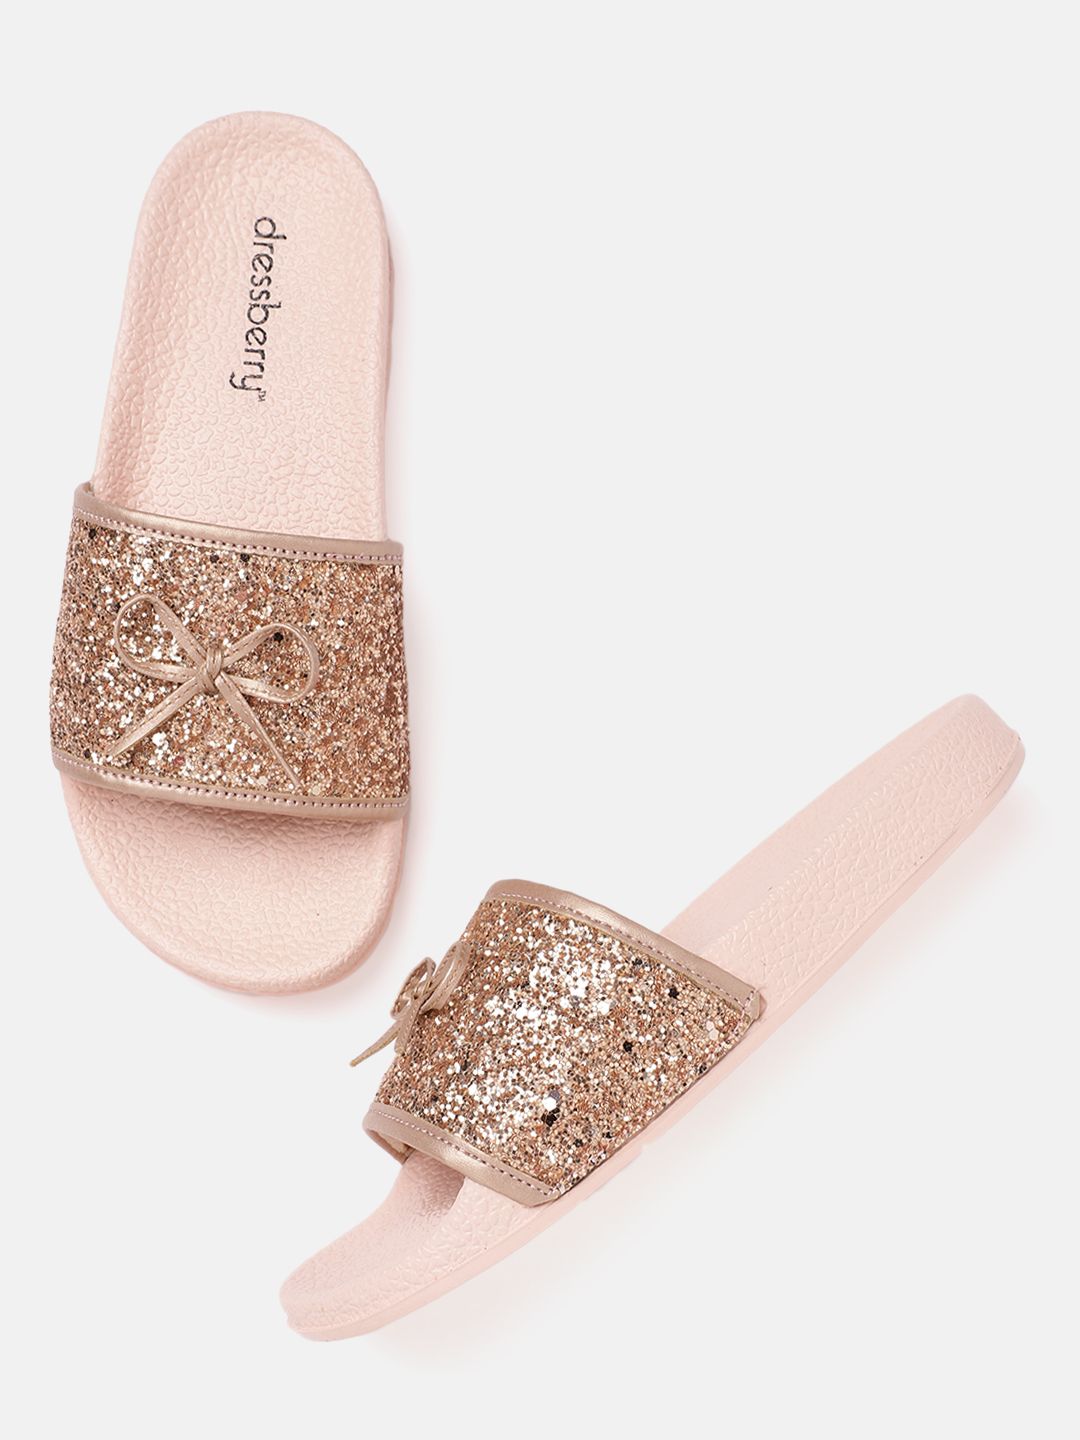 DressBerry Women Rose Gold-Toned Embellished Flip Flops with Bows Price in India